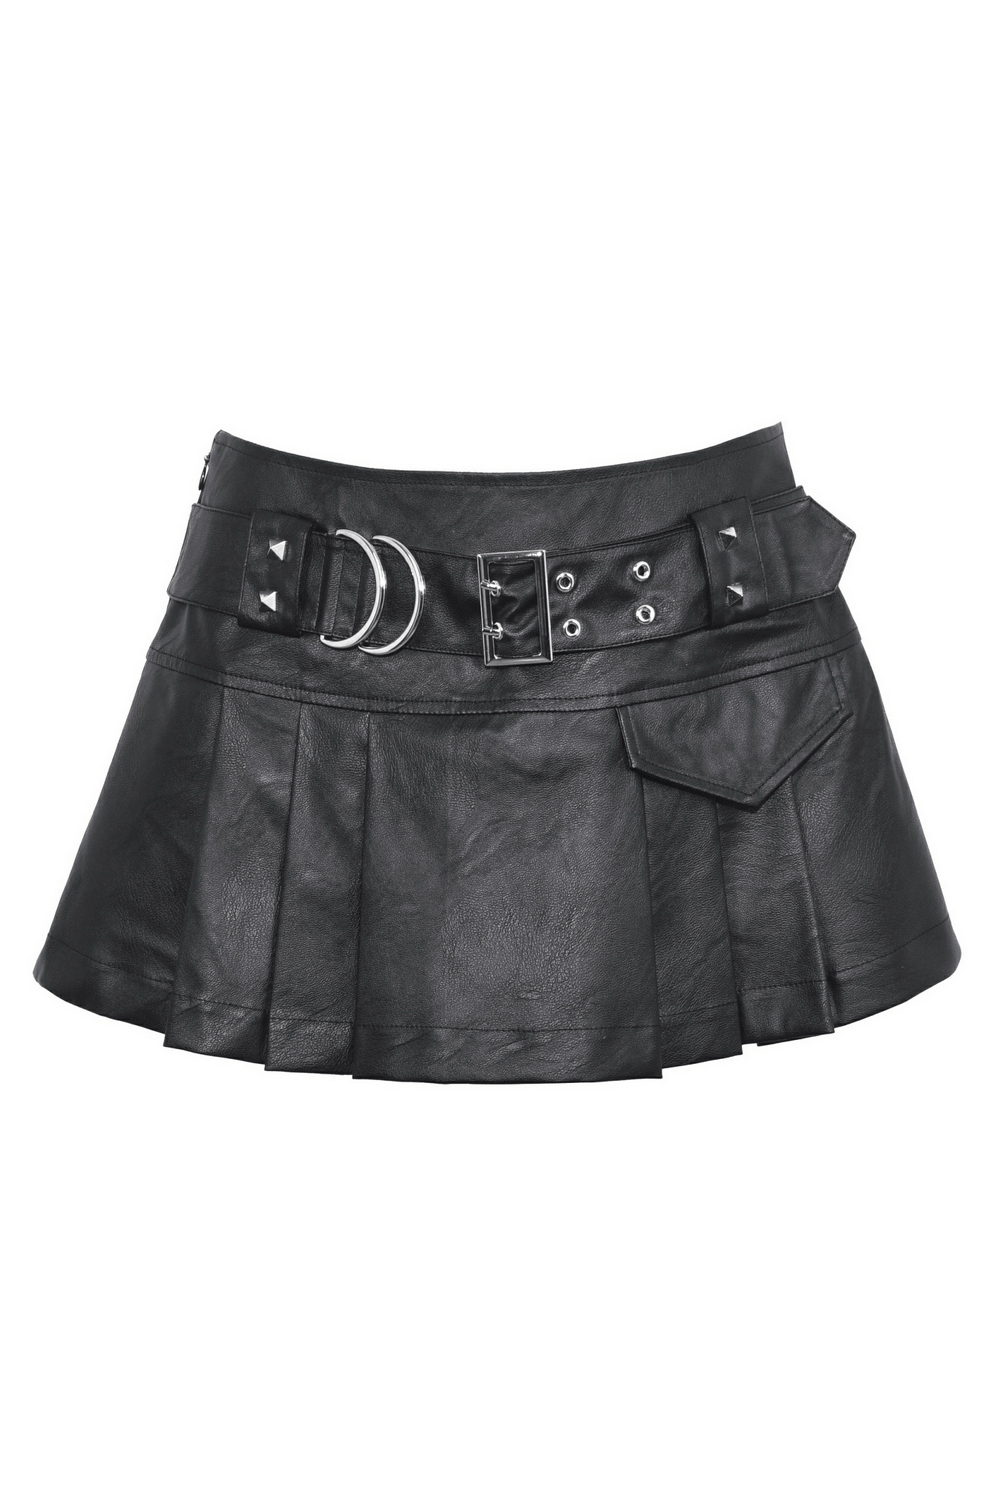 Stylish Faux Leather Pleated Mini Skirt with Buckle